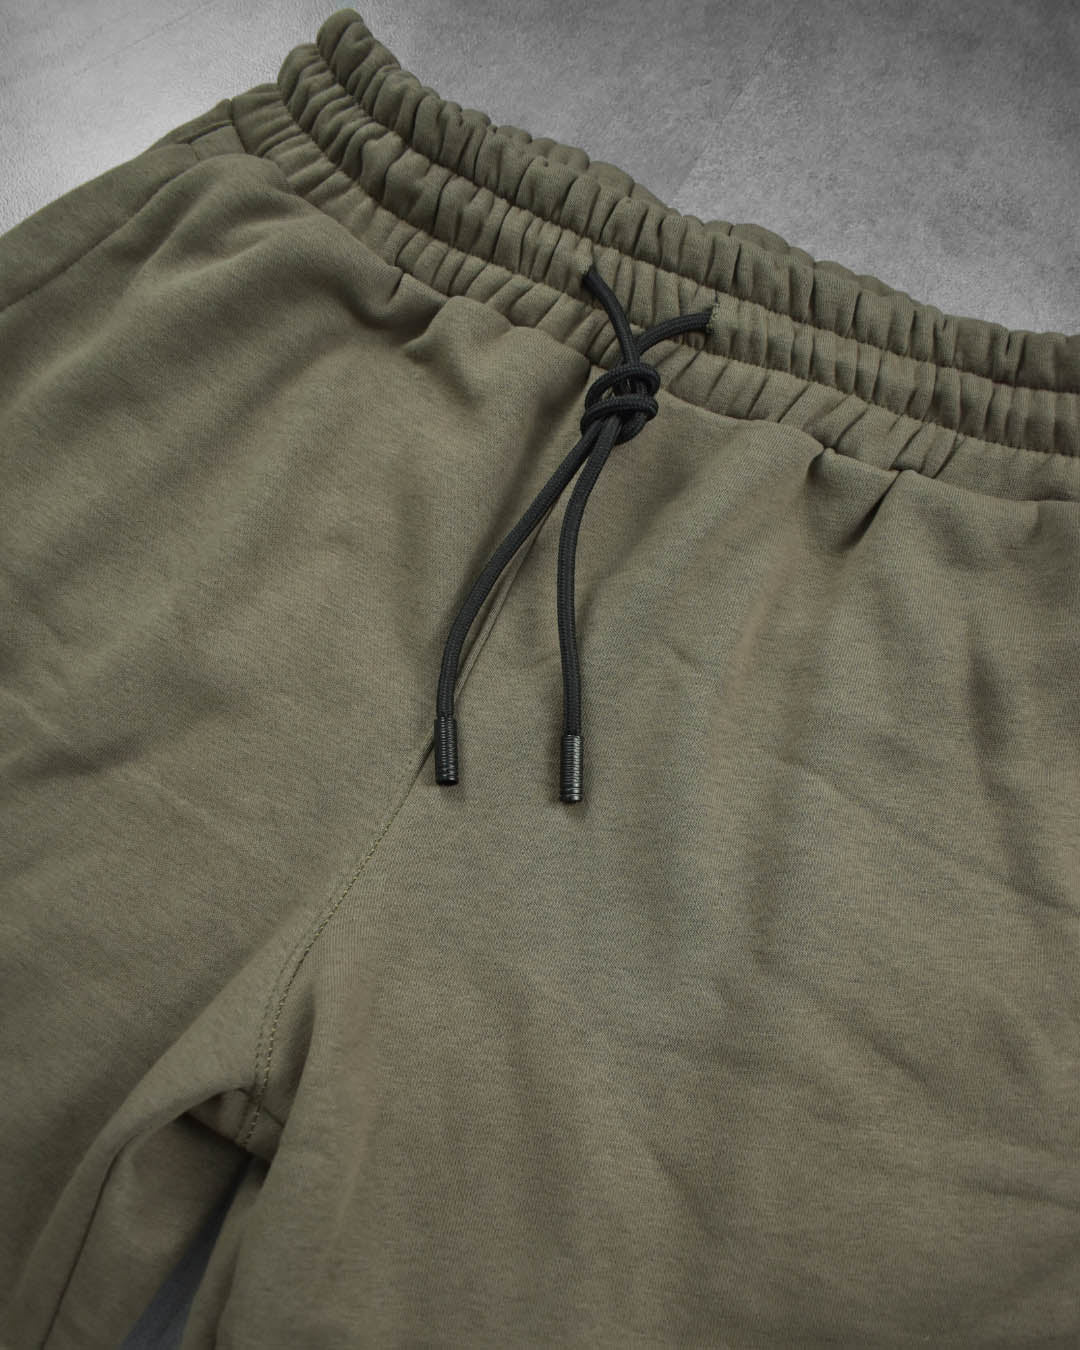 walk shorts | classic | terry | olive